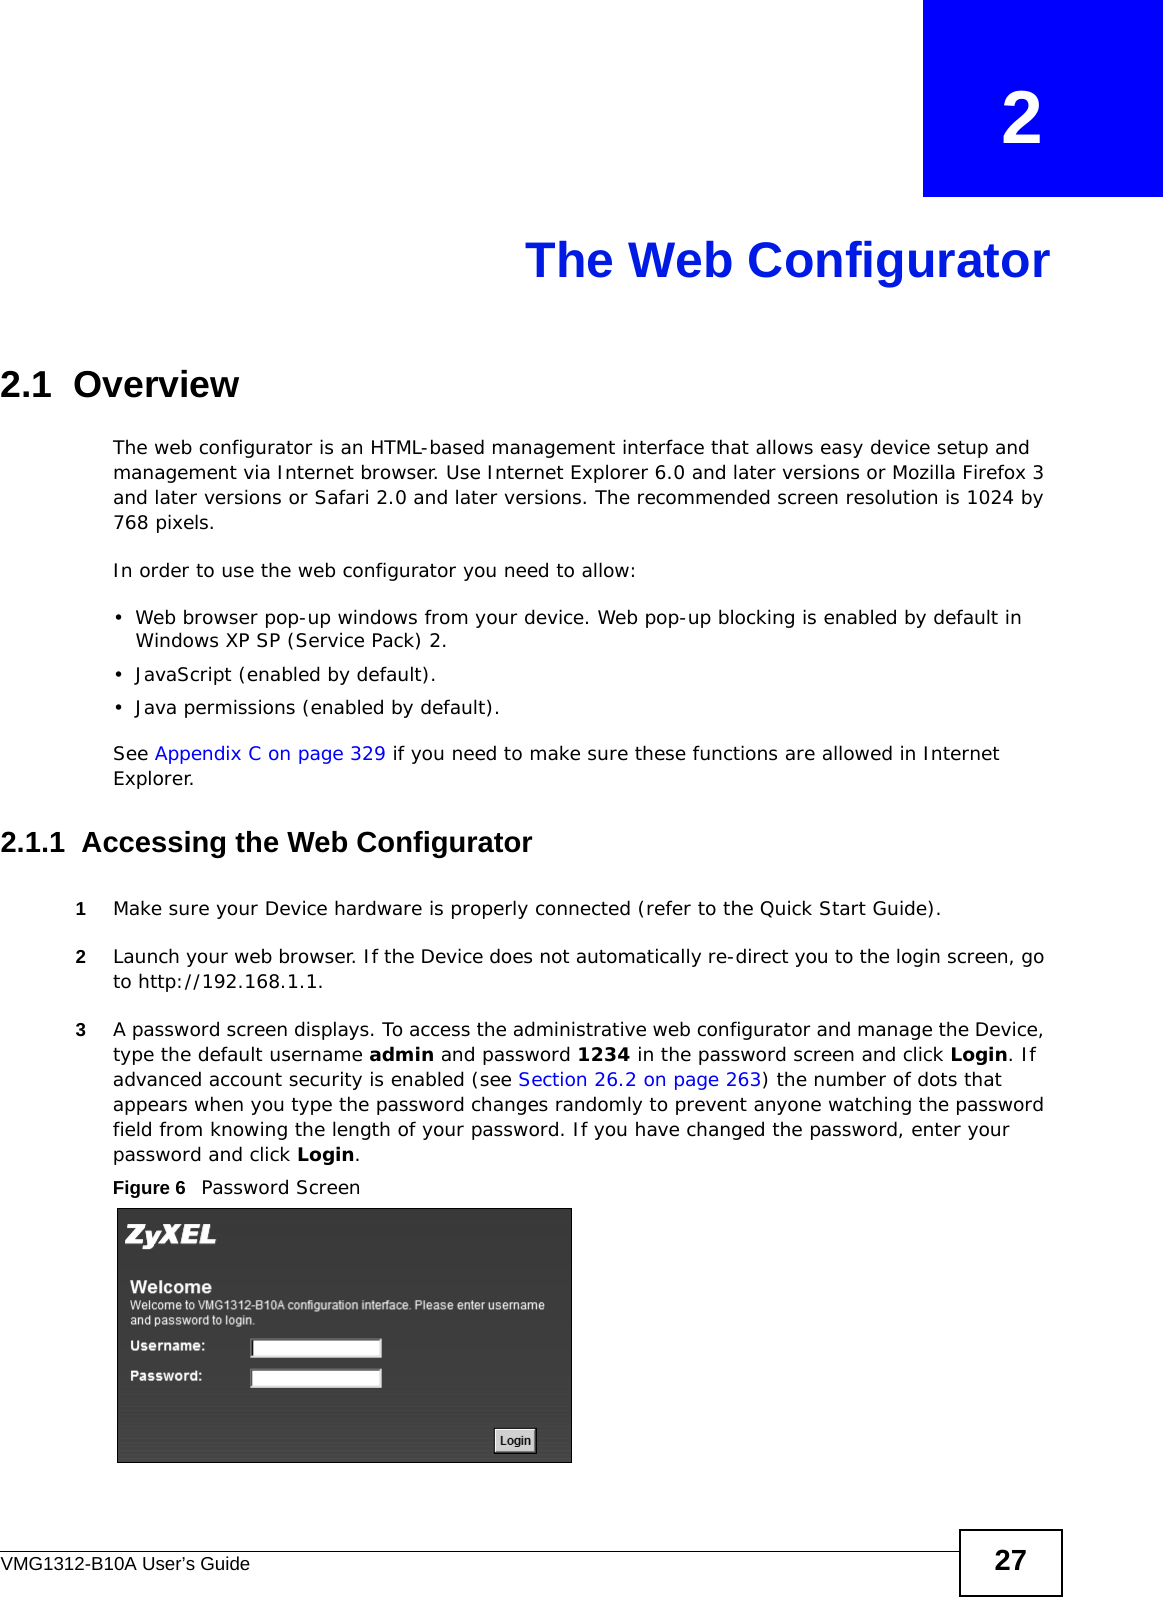 VMG1312-B10A User’s Guide 27CHAPTER   2The Web Configurator2.1  OverviewThe web configurator is an HTML-based management interface that allows easy device setup and management via Internet browser. Use Internet Explorer 6.0 and later versions or Mozilla Firefox 3 and later versions or Safari 2.0 and later versions. The recommended screen resolution is 1024 by 768 pixels.In order to use the web configurator you need to allow:• Web browser pop-up windows from your device. Web pop-up blocking is enabled by default in Windows XP SP (Service Pack) 2.• JavaScript (enabled by default).• Java permissions (enabled by default).See Appendix C on page 329 if you need to make sure these functions are allowed in Internet Explorer. 2.1.1  Accessing the Web Configurator1Make sure your Device hardware is properly connected (refer to the Quick Start Guide).2Launch your web browser. If the Device does not automatically re-direct you to the login screen, go to http://192.168.1.1.3A password screen displays. To access the administrative web configurator and manage the Device, type the default username admin and password 1234 in the password screen and click Login. If advanced account security is enabled (see Section 26.2 on page 263) the number of dots that appears when you type the password changes randomly to prevent anyone watching the password field from knowing the length of your password. If you have changed the password, enter your password and click Login. Figure 6   Password Screen